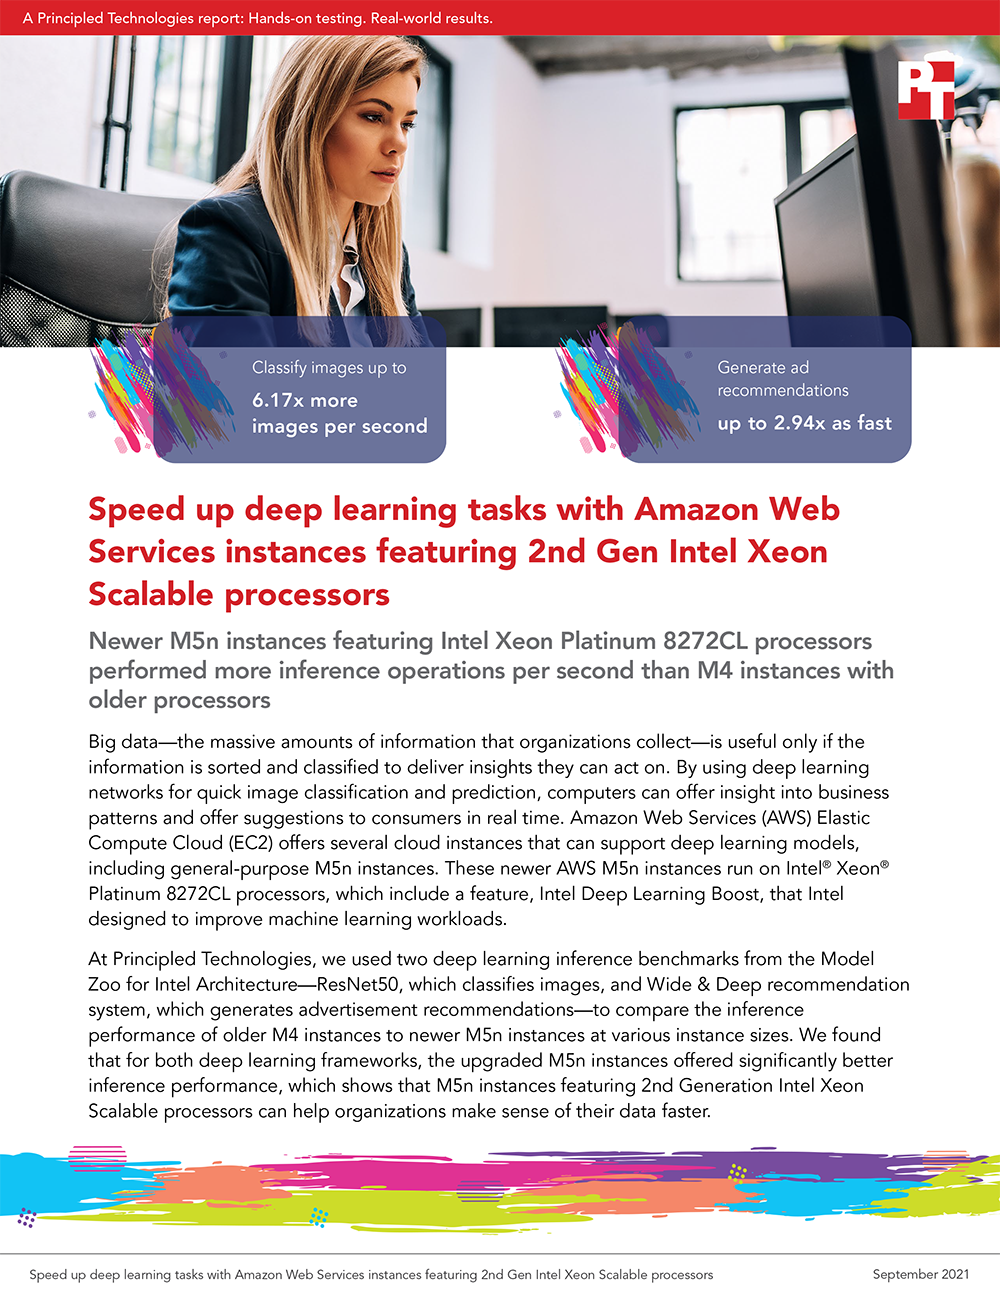  Speed up deep learning tasks with Amazon Web Services instances featuring 2nd Gen Intel Xeon Scalable processors